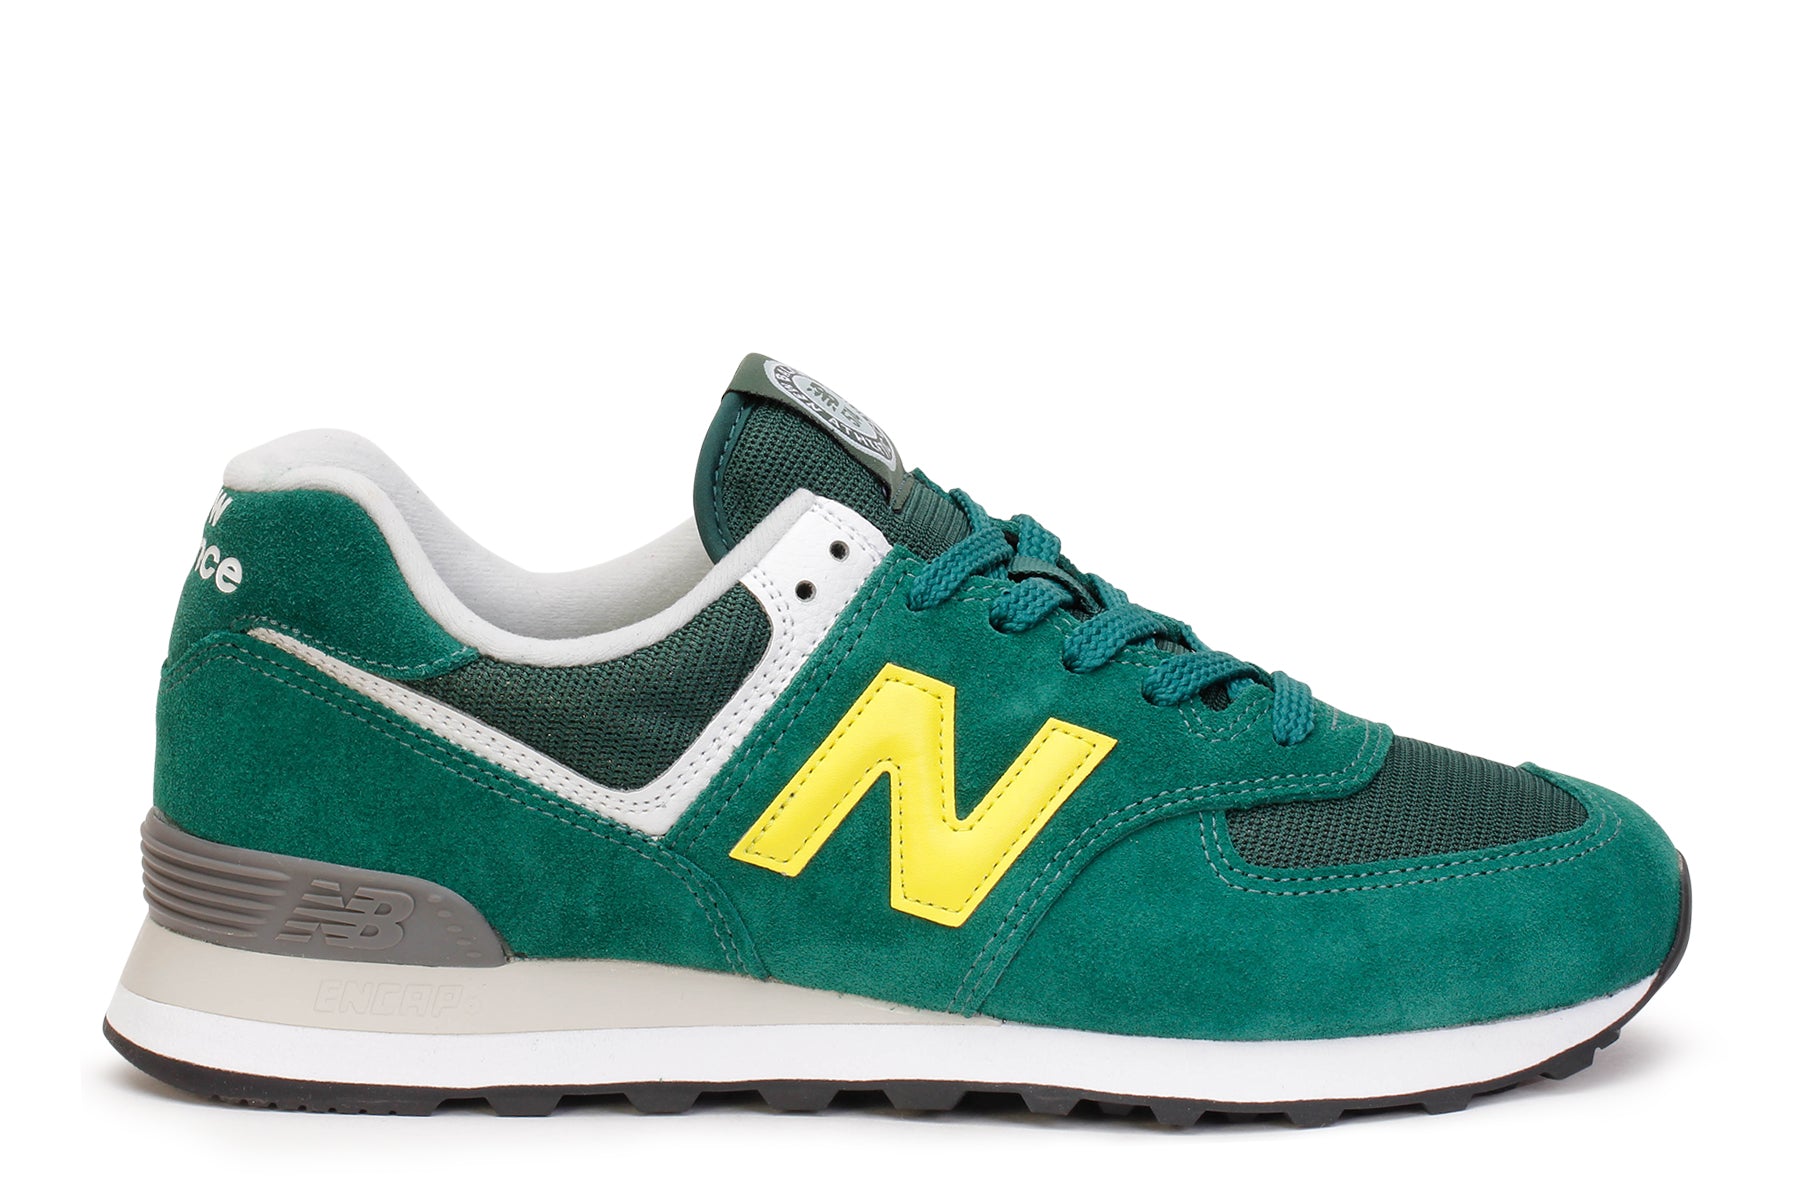 NEW BALANCE 574 LIFESTYLE SUEDE MESH SNEAKERS Man Green